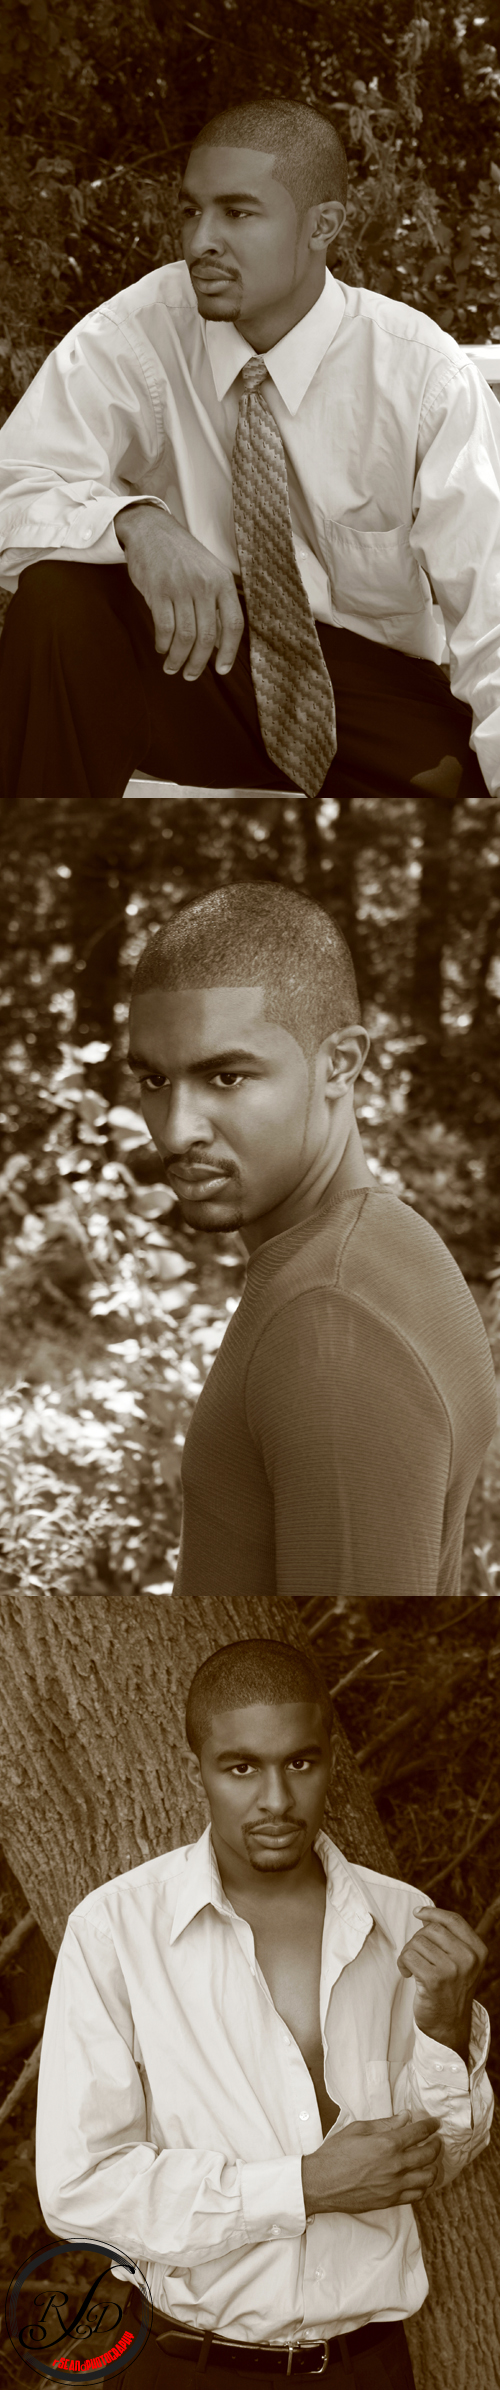 Male model photo shoot of Mrshowtime3083 by rSEANd PHOTOGRAPHY in West Hyattsville, MD